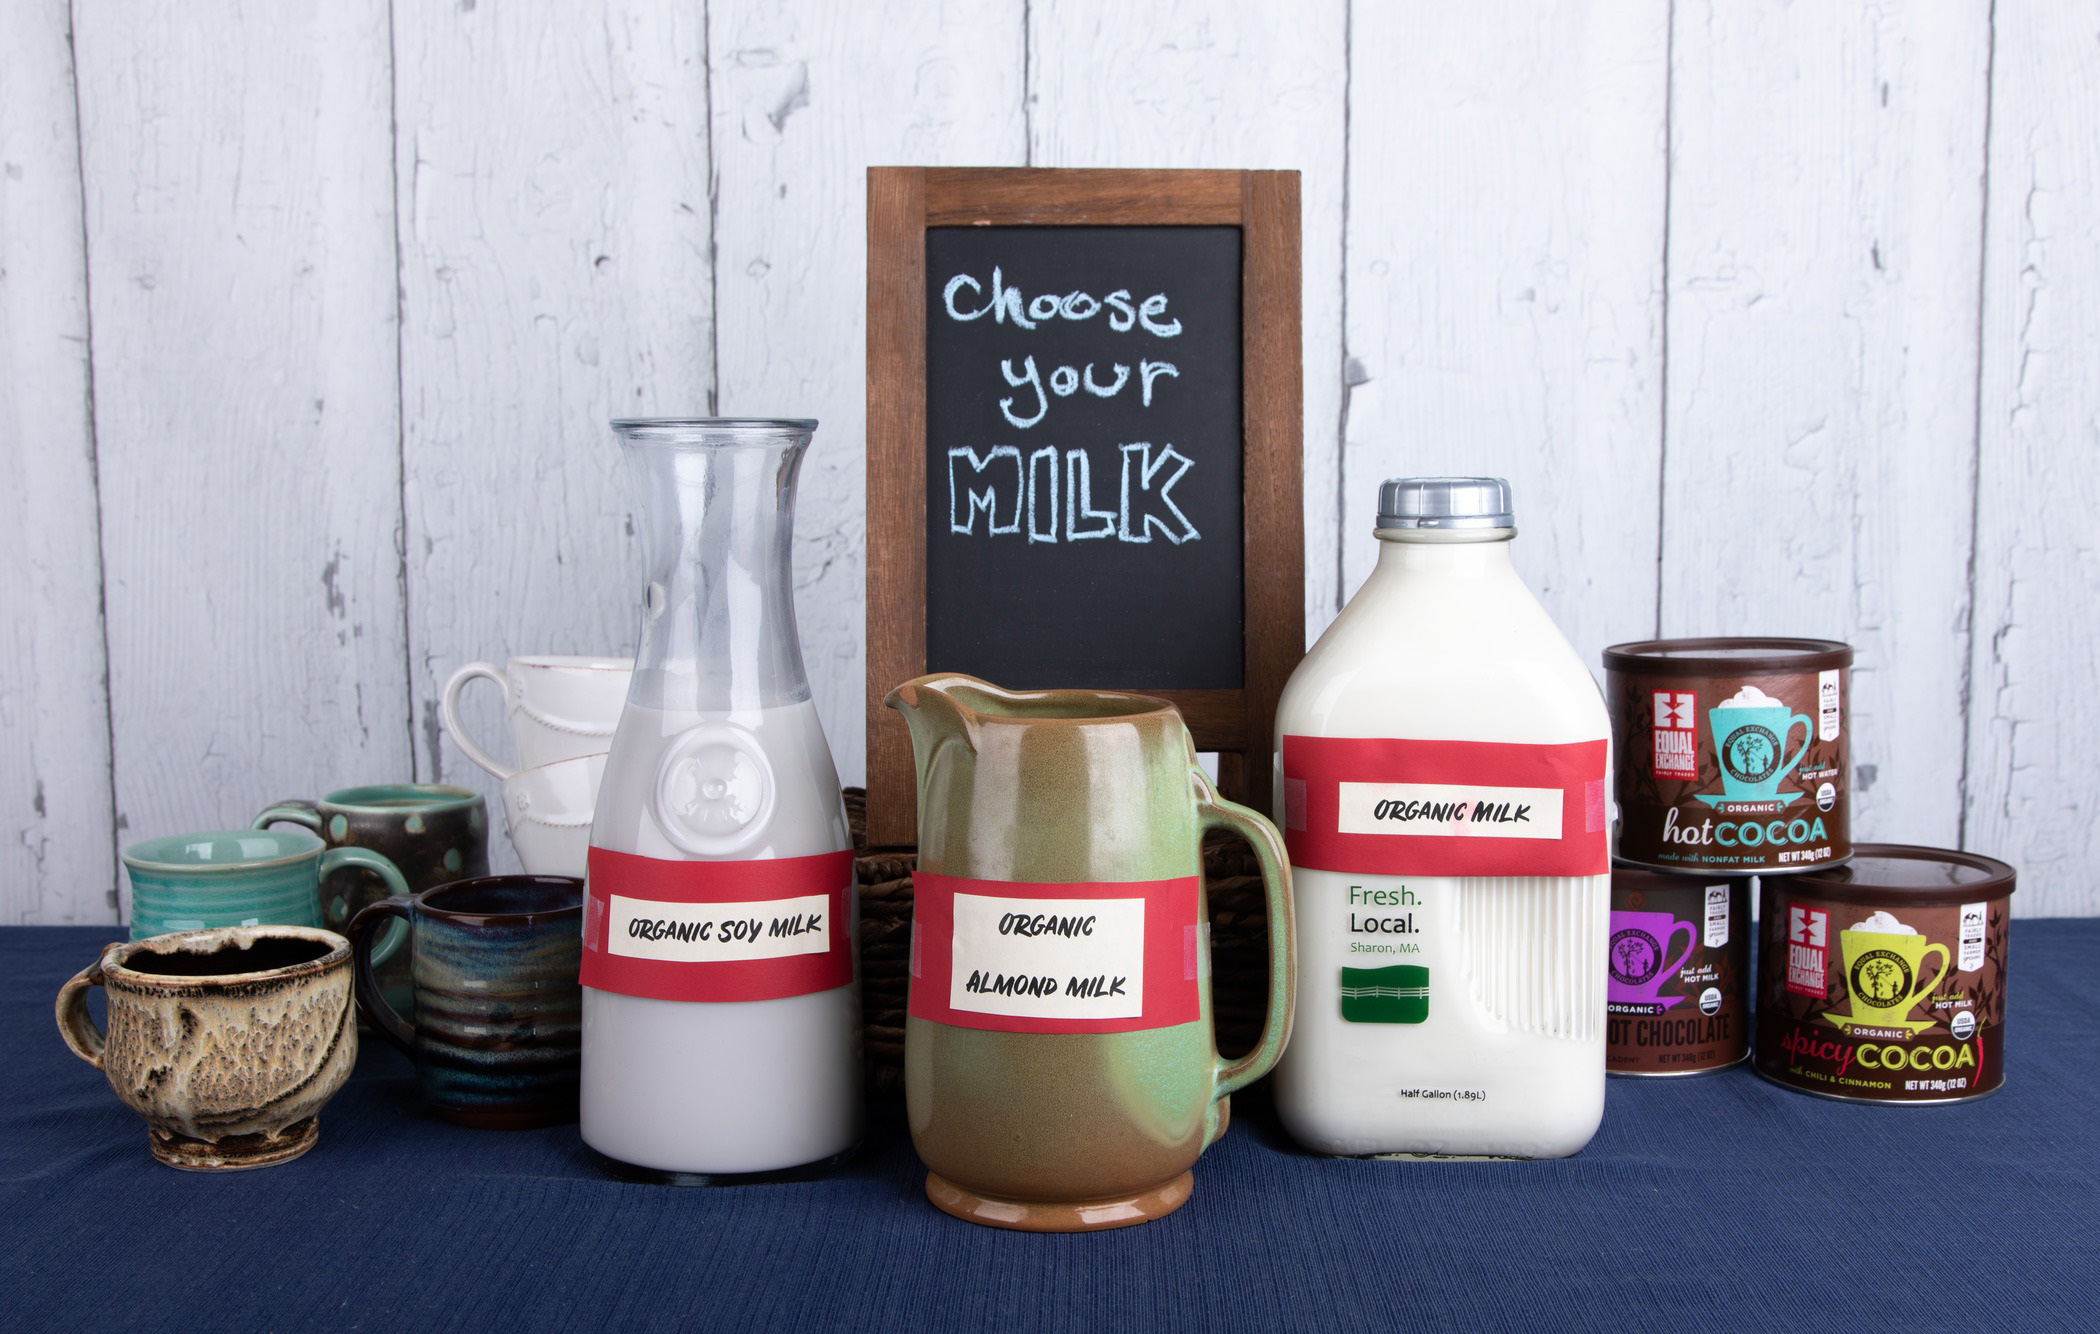 Milk, soy miilk, almond milk and pother options